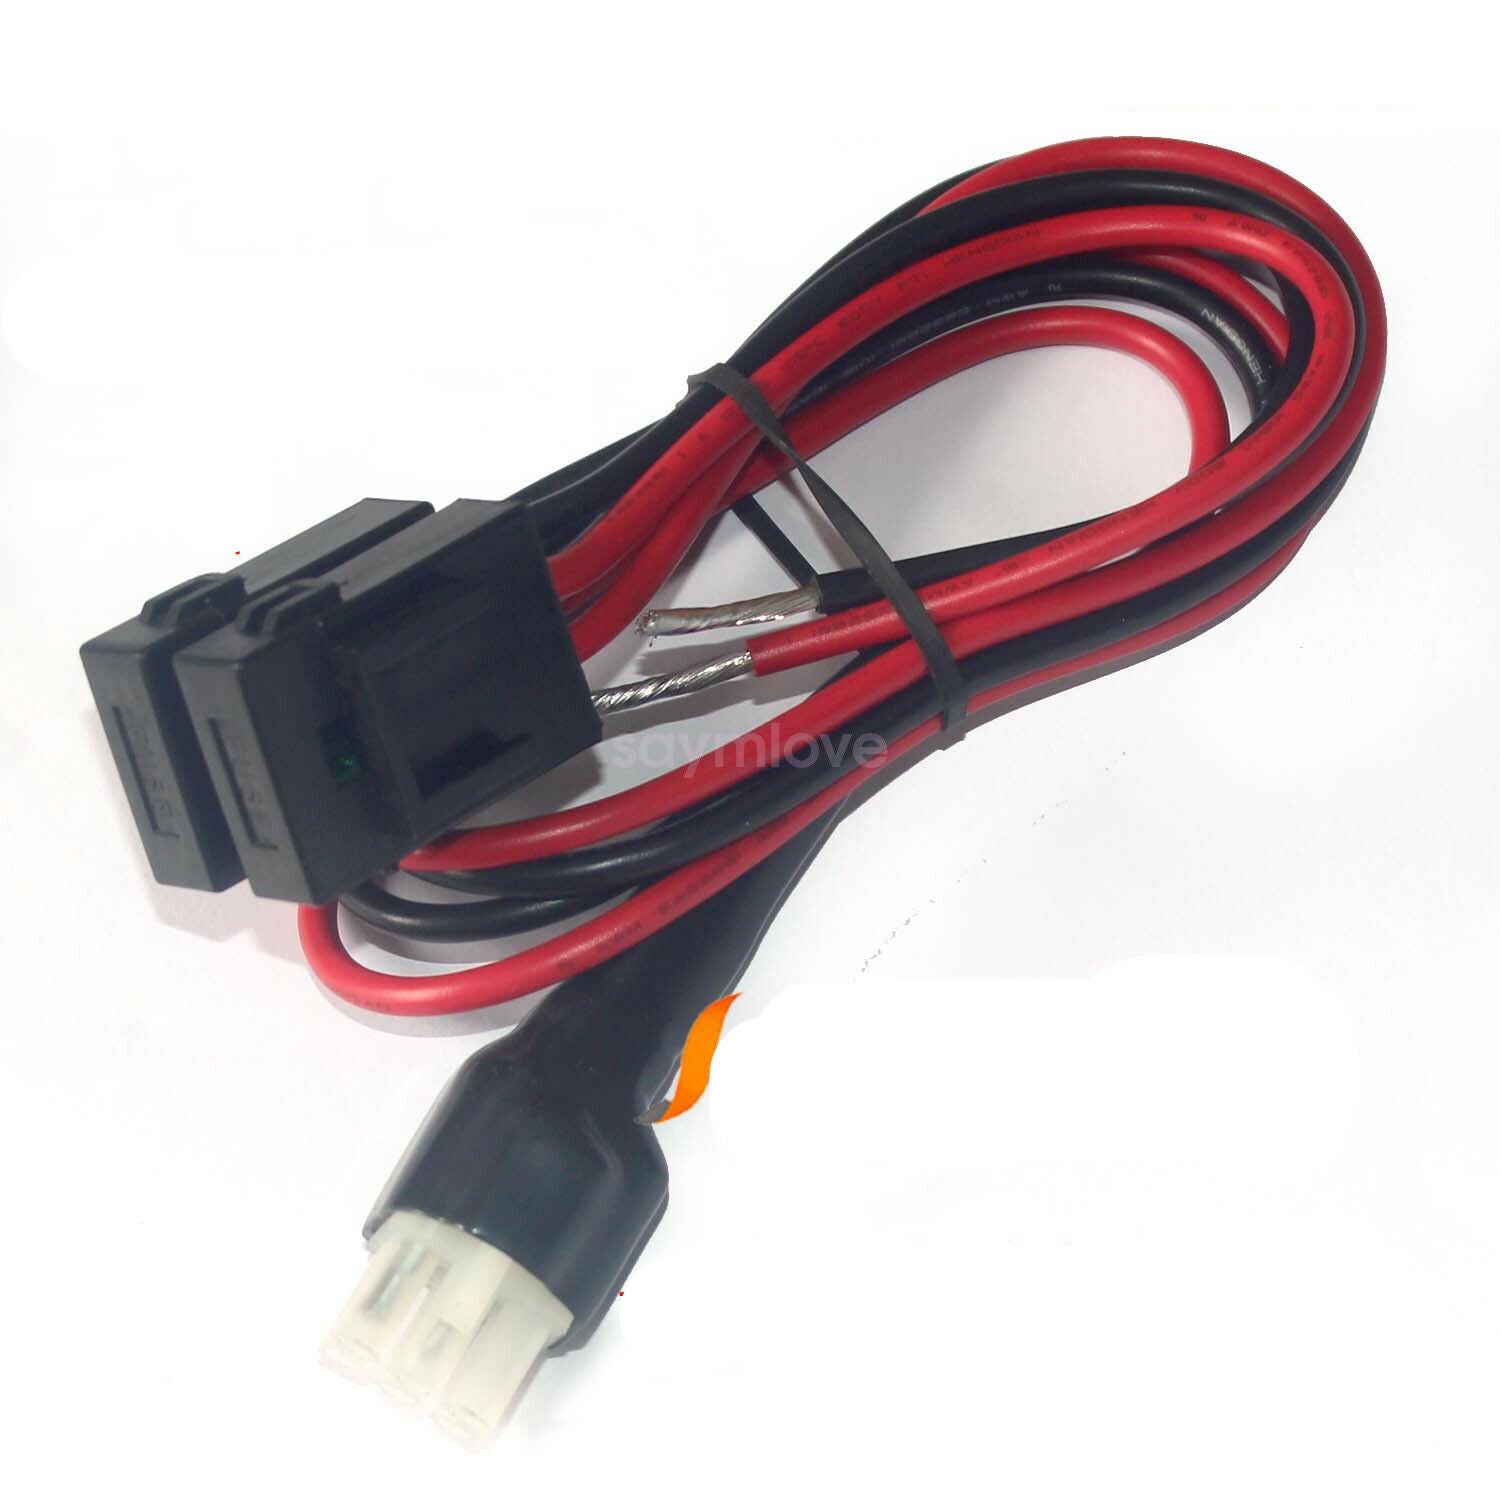 30A Fuse Power Supply Cord Cable For Yaesu FT-857D FT-897D IC725A IC706 IC718